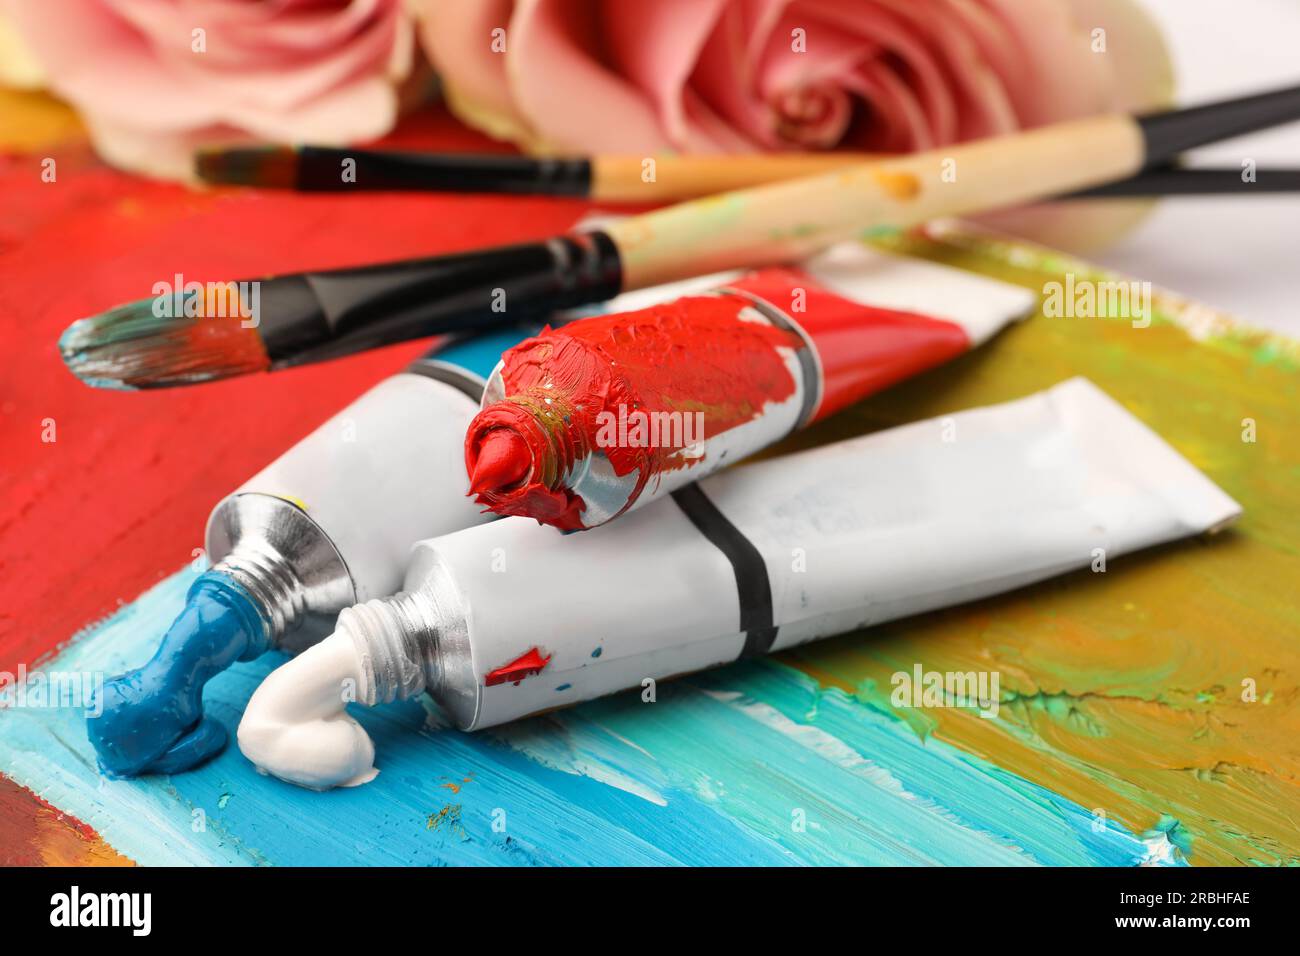 Object oil painting supplies hi-res stock photography and images